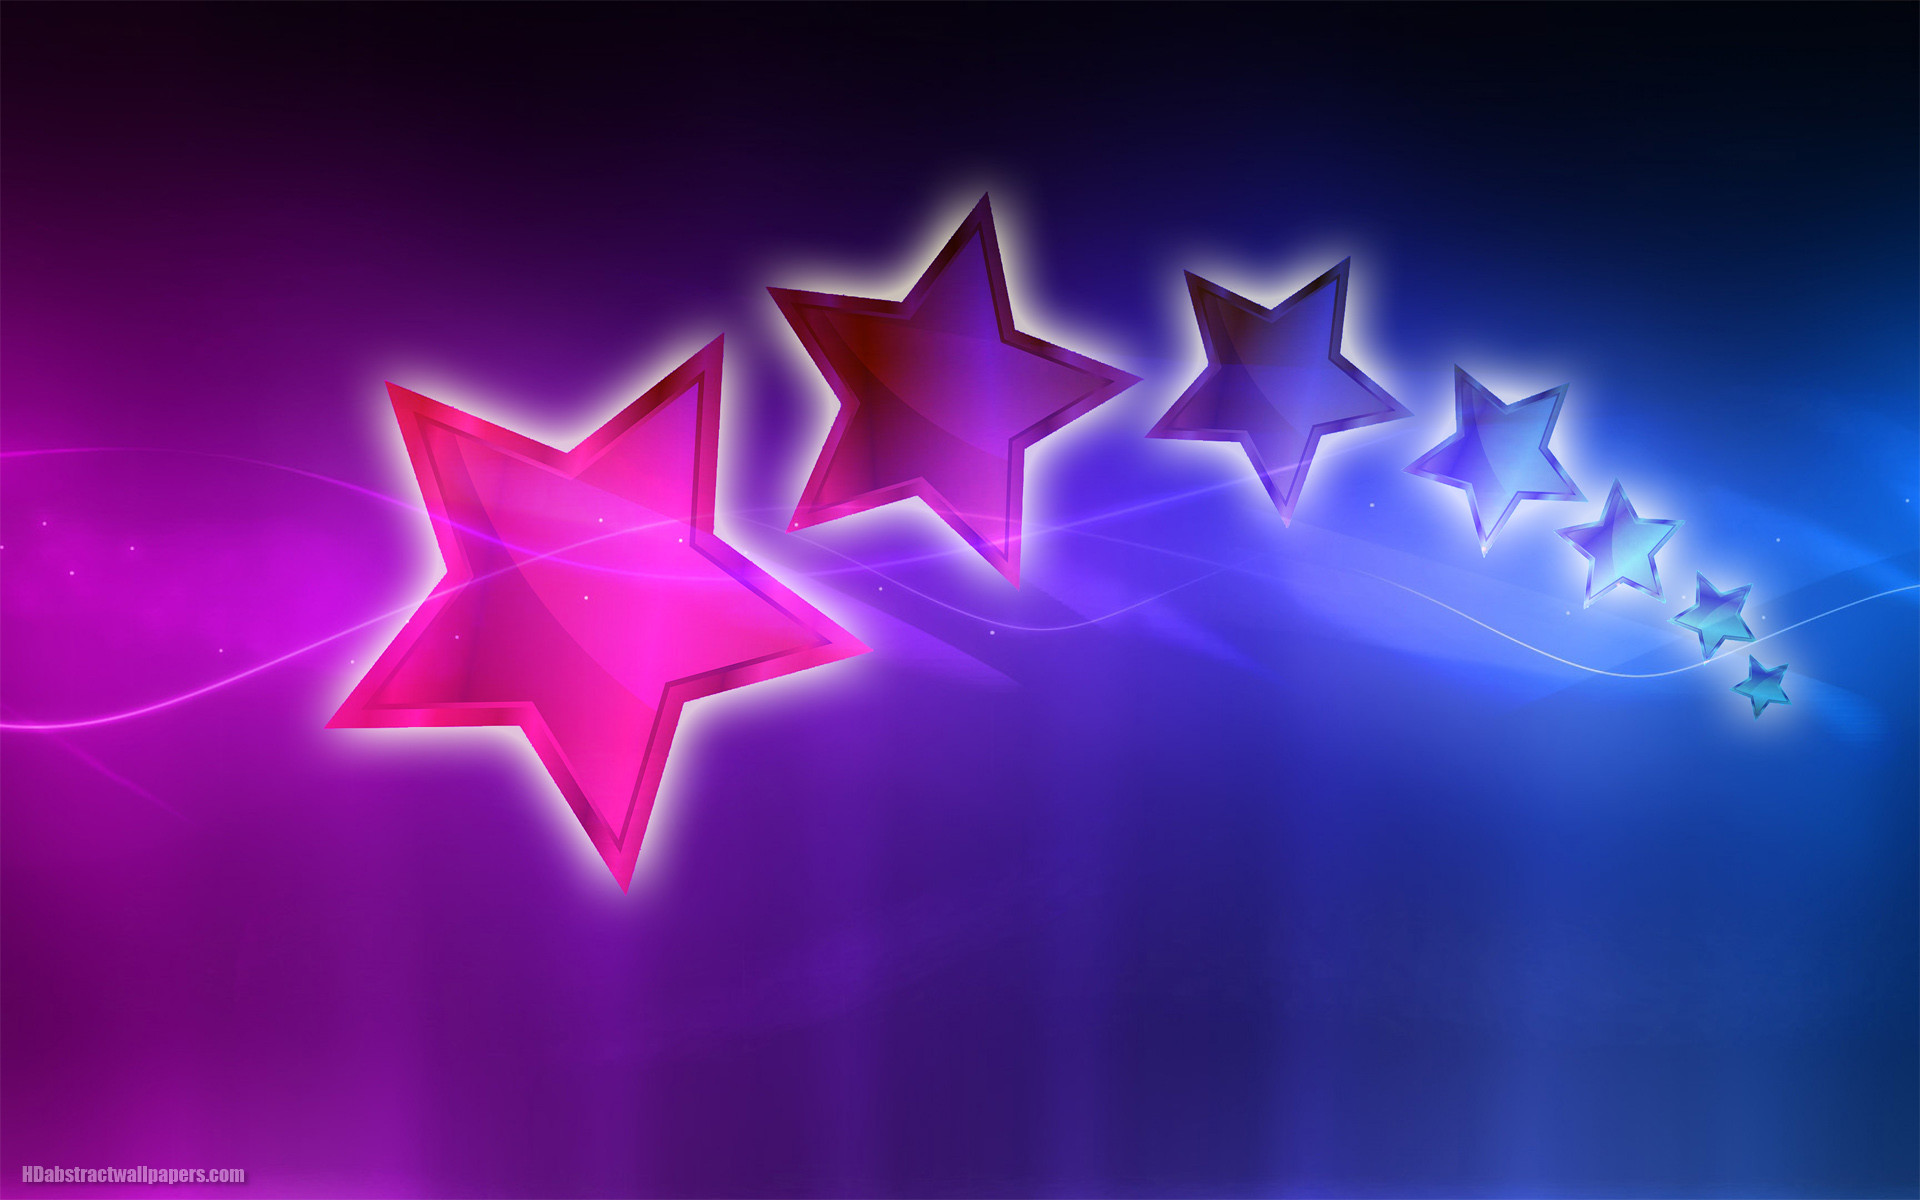 1920x1200 Abstract wallpaper with stars and the colors pink, purple, blue and black.